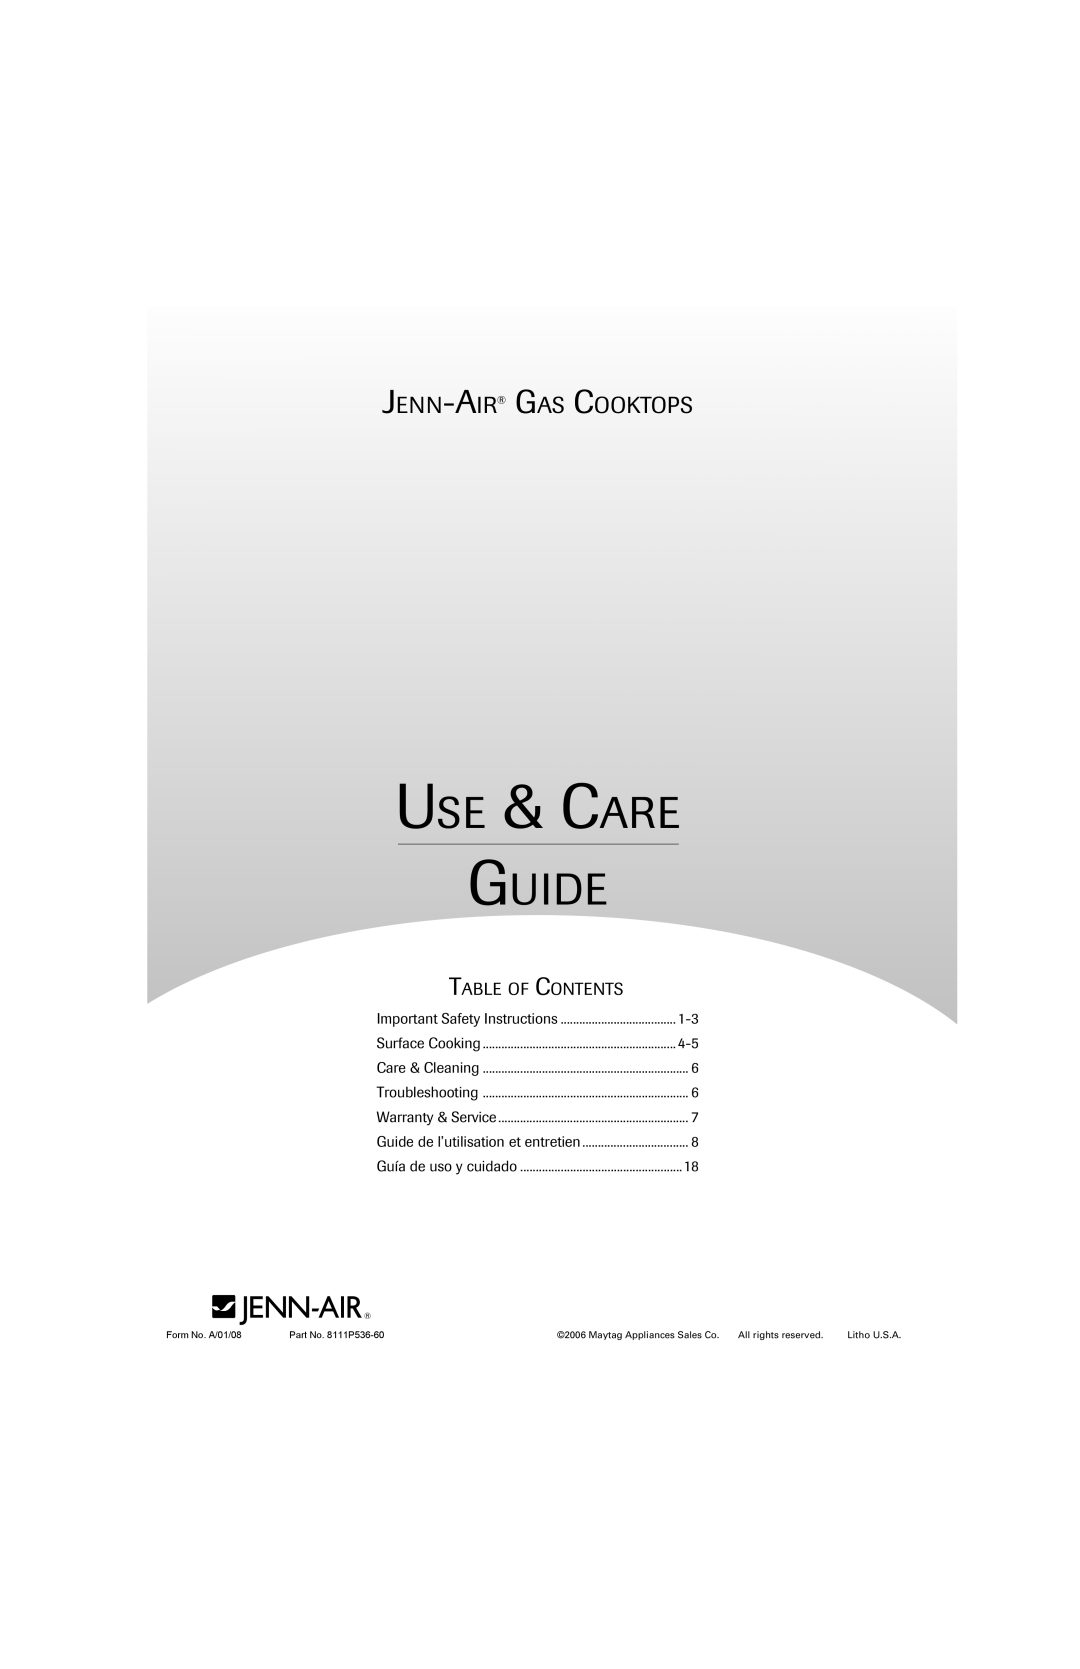 Maytag 8111P536-60 important safety instructions Use & Care Guide, Jenn-Air Gas Cooktops, Table Of Contents, Litho U.S.A 